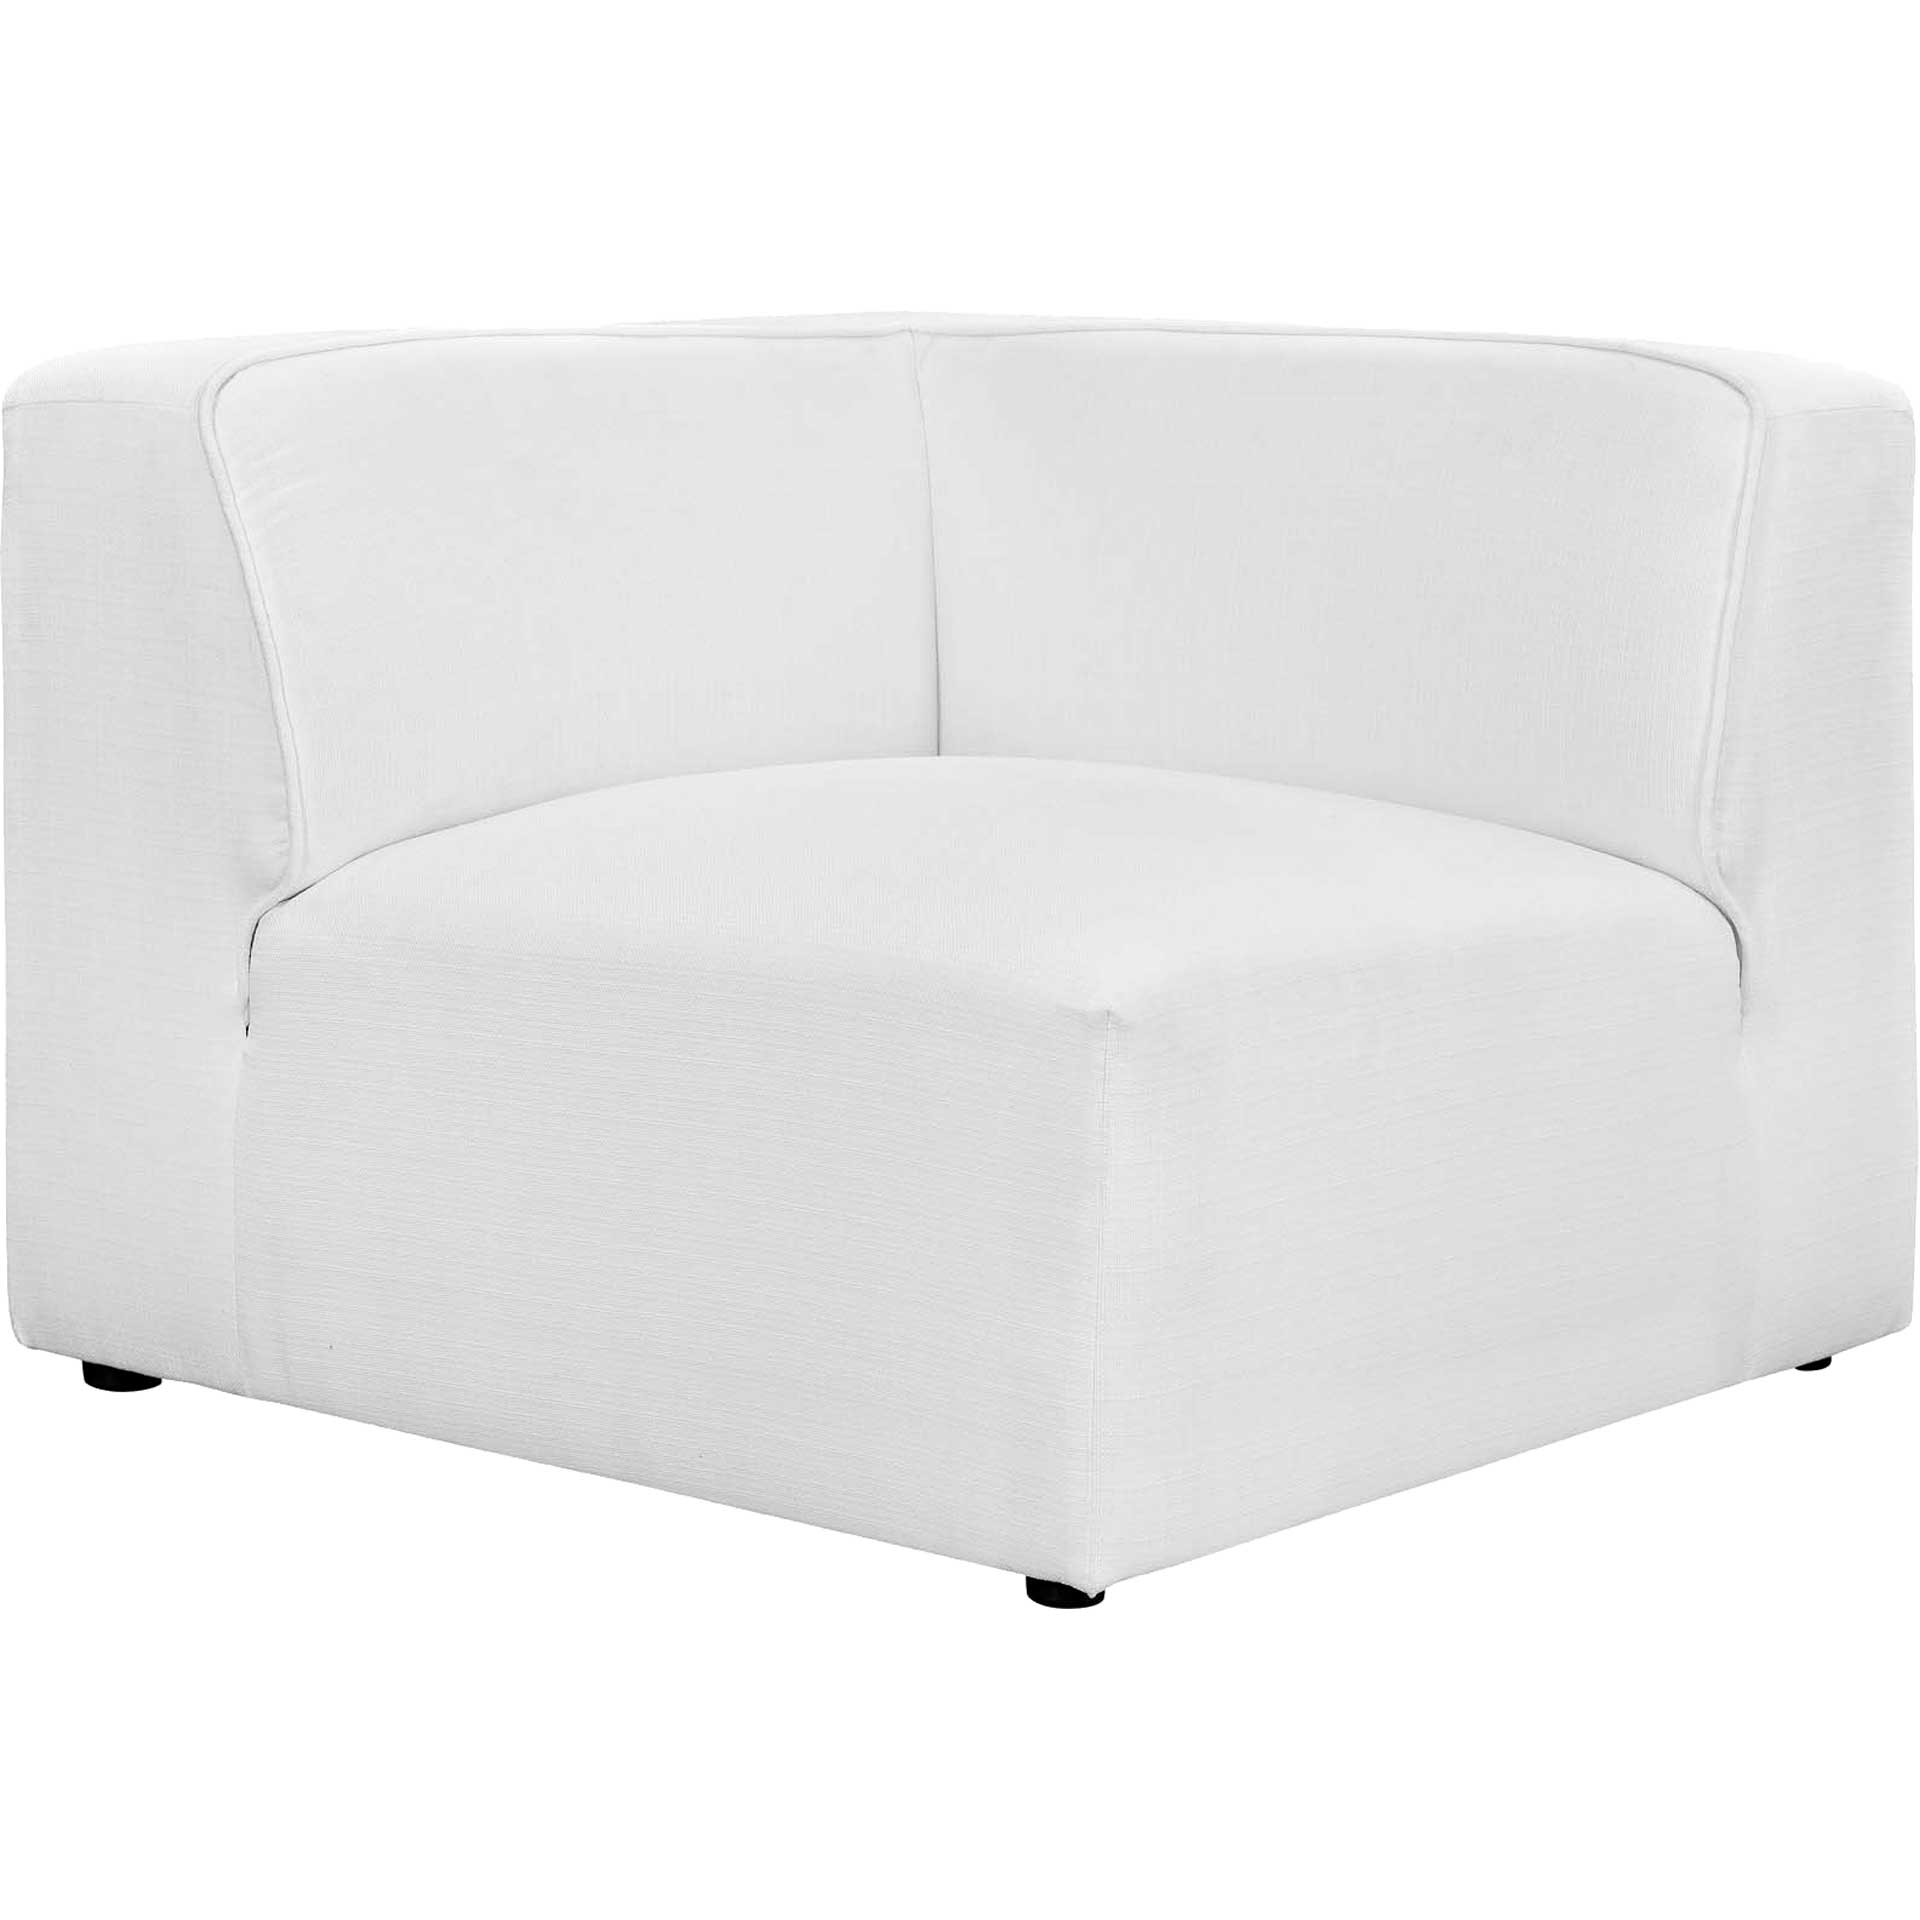 Maisie 5 Piece L-Shaped Armless Sectional Sofa White